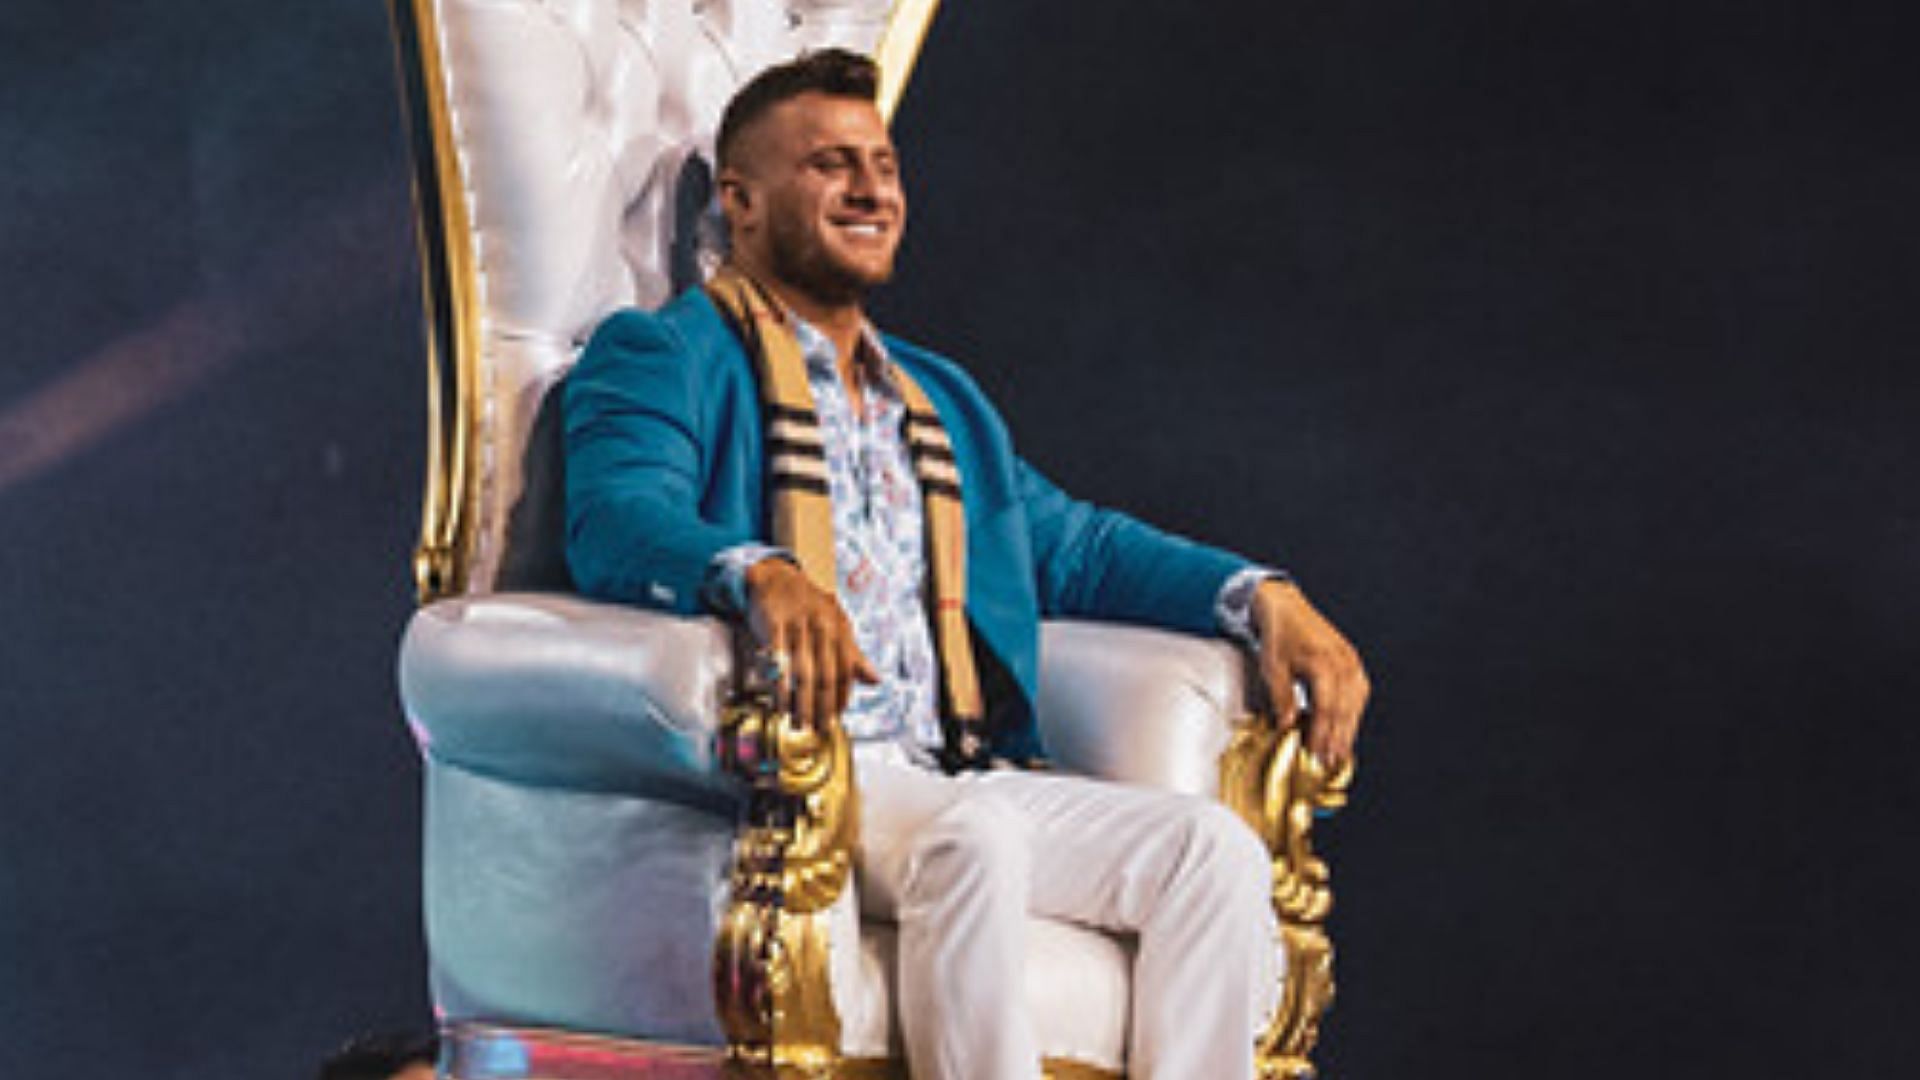 Friedman making his entrance on an episode of AEW Dynamite in 2022